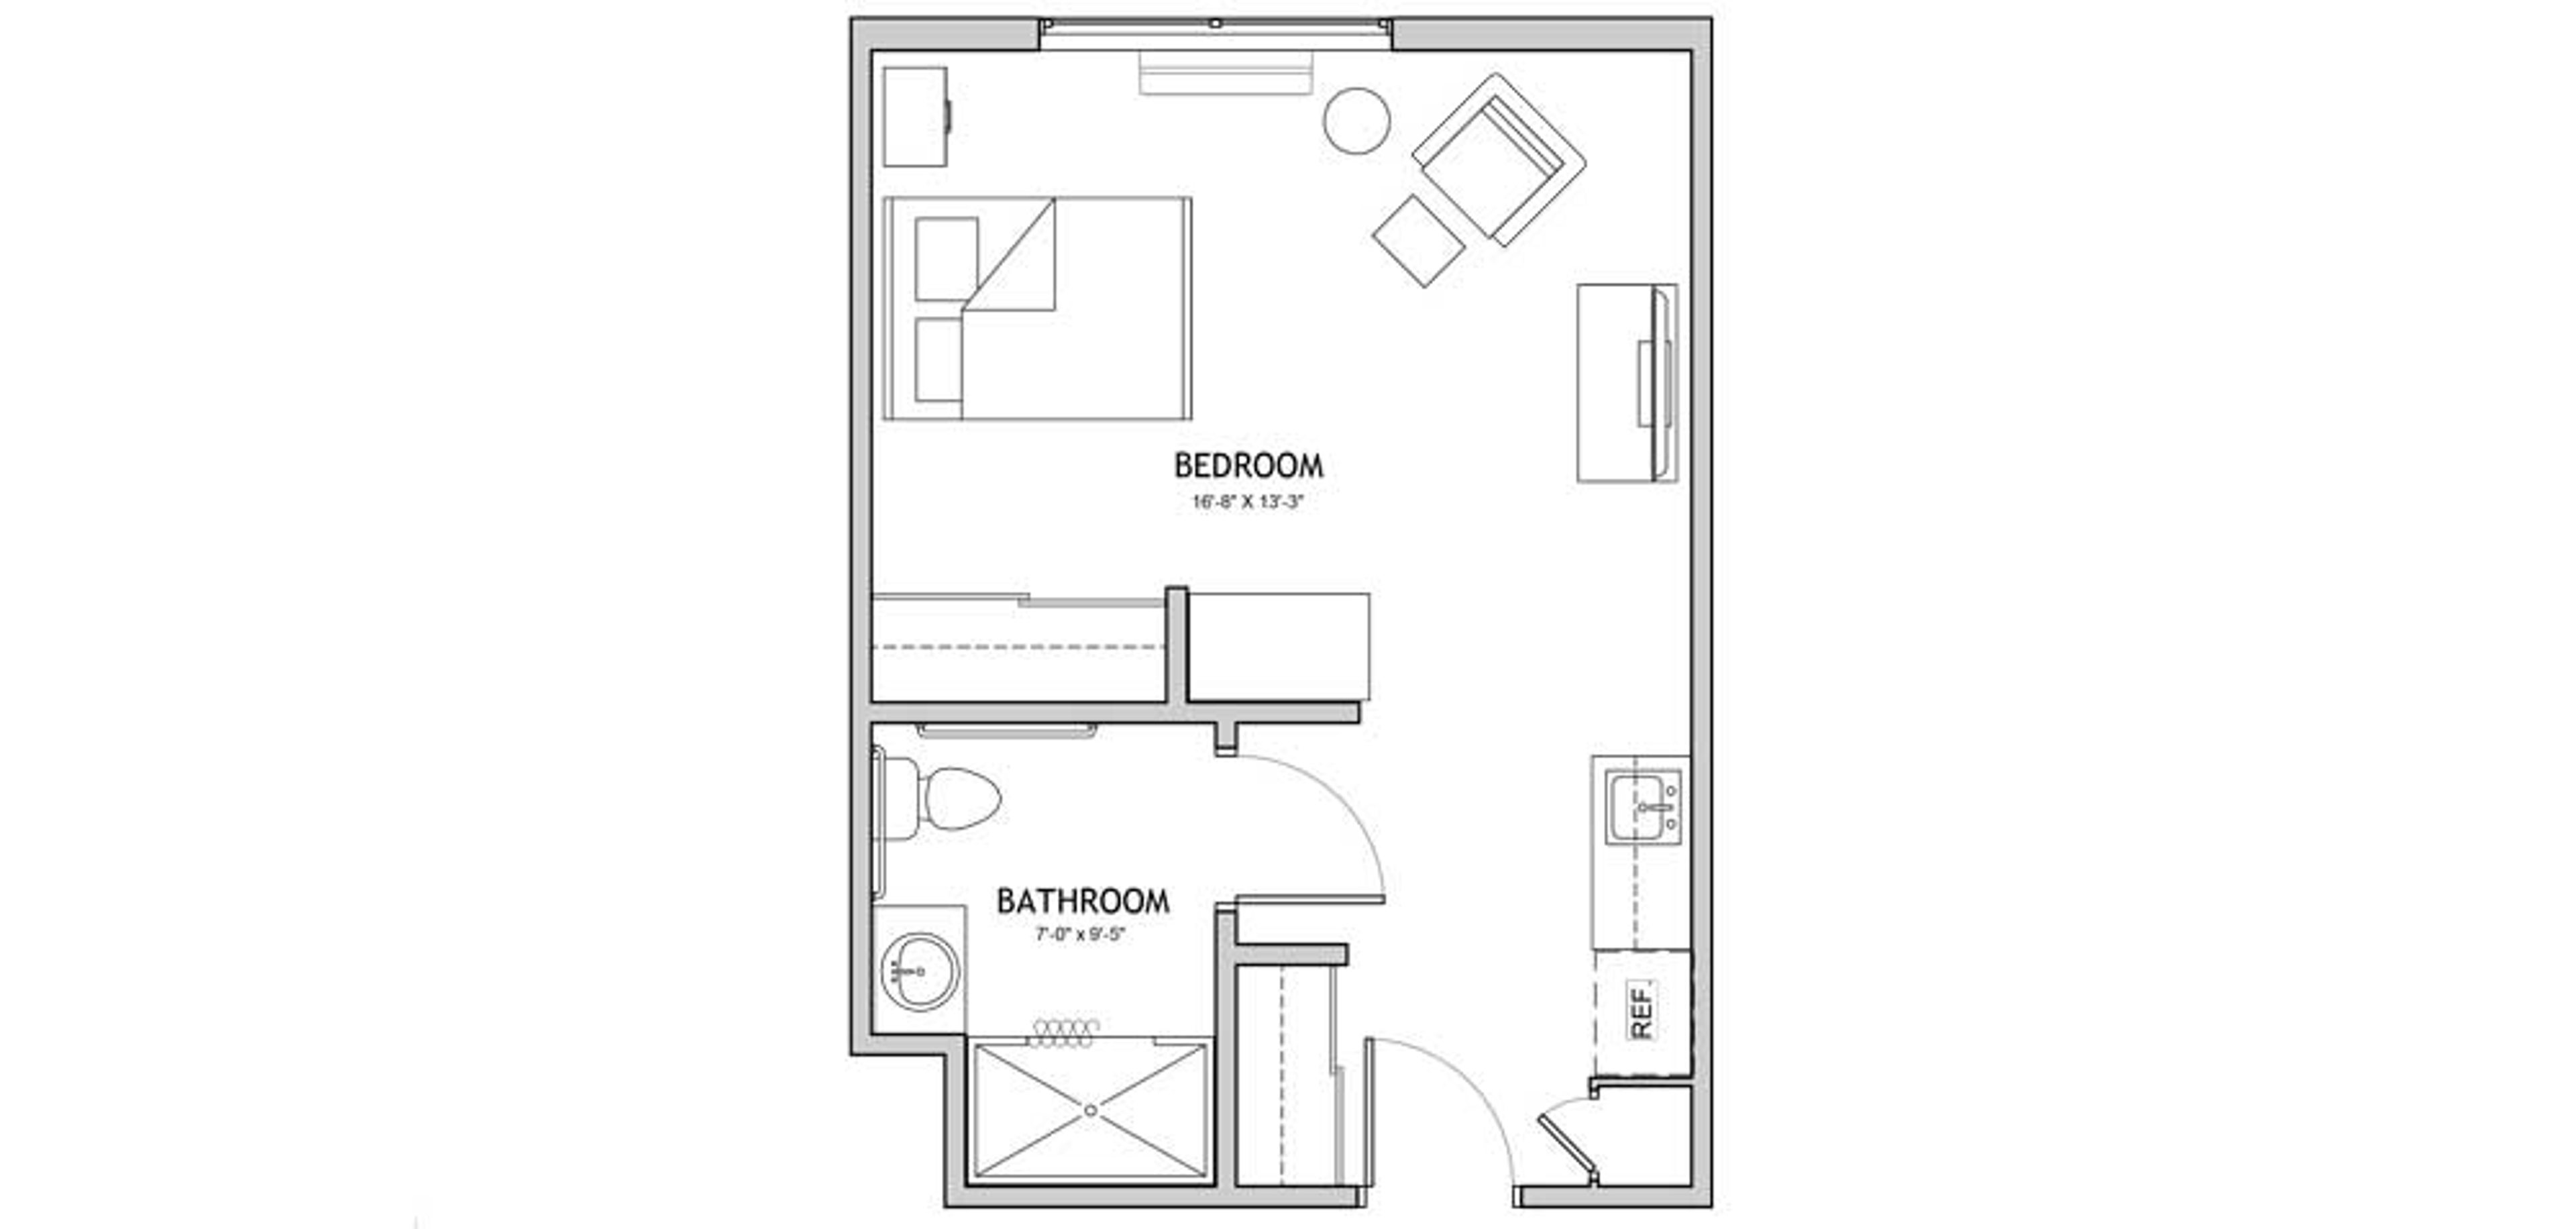 Floorplan - The Auberge at North Ogden - Studio Private, 412 sq. ft. Memory Care